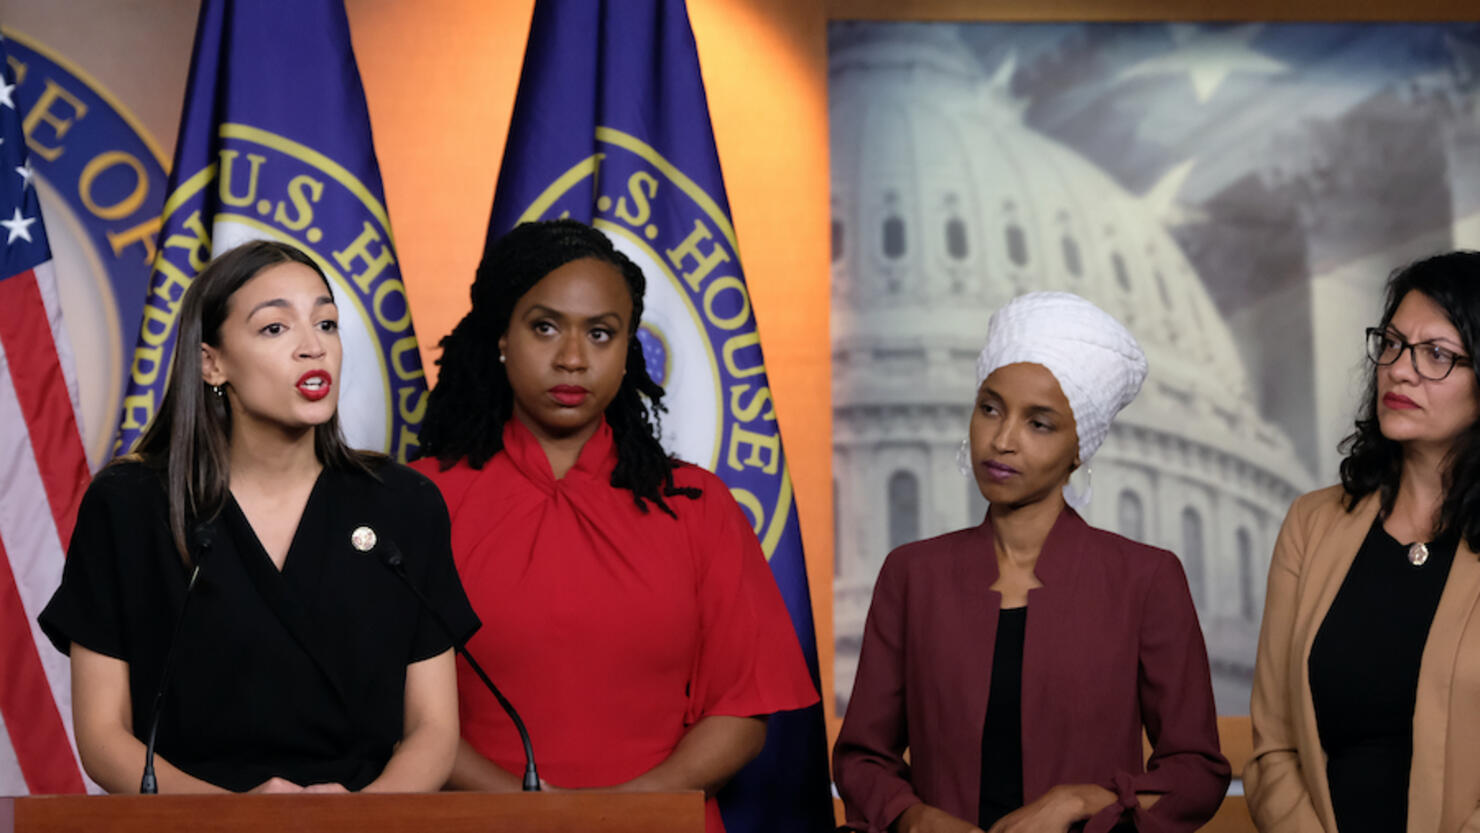 Aoc The Squad Congress Members All Win Re Election Bids Iheart 2274